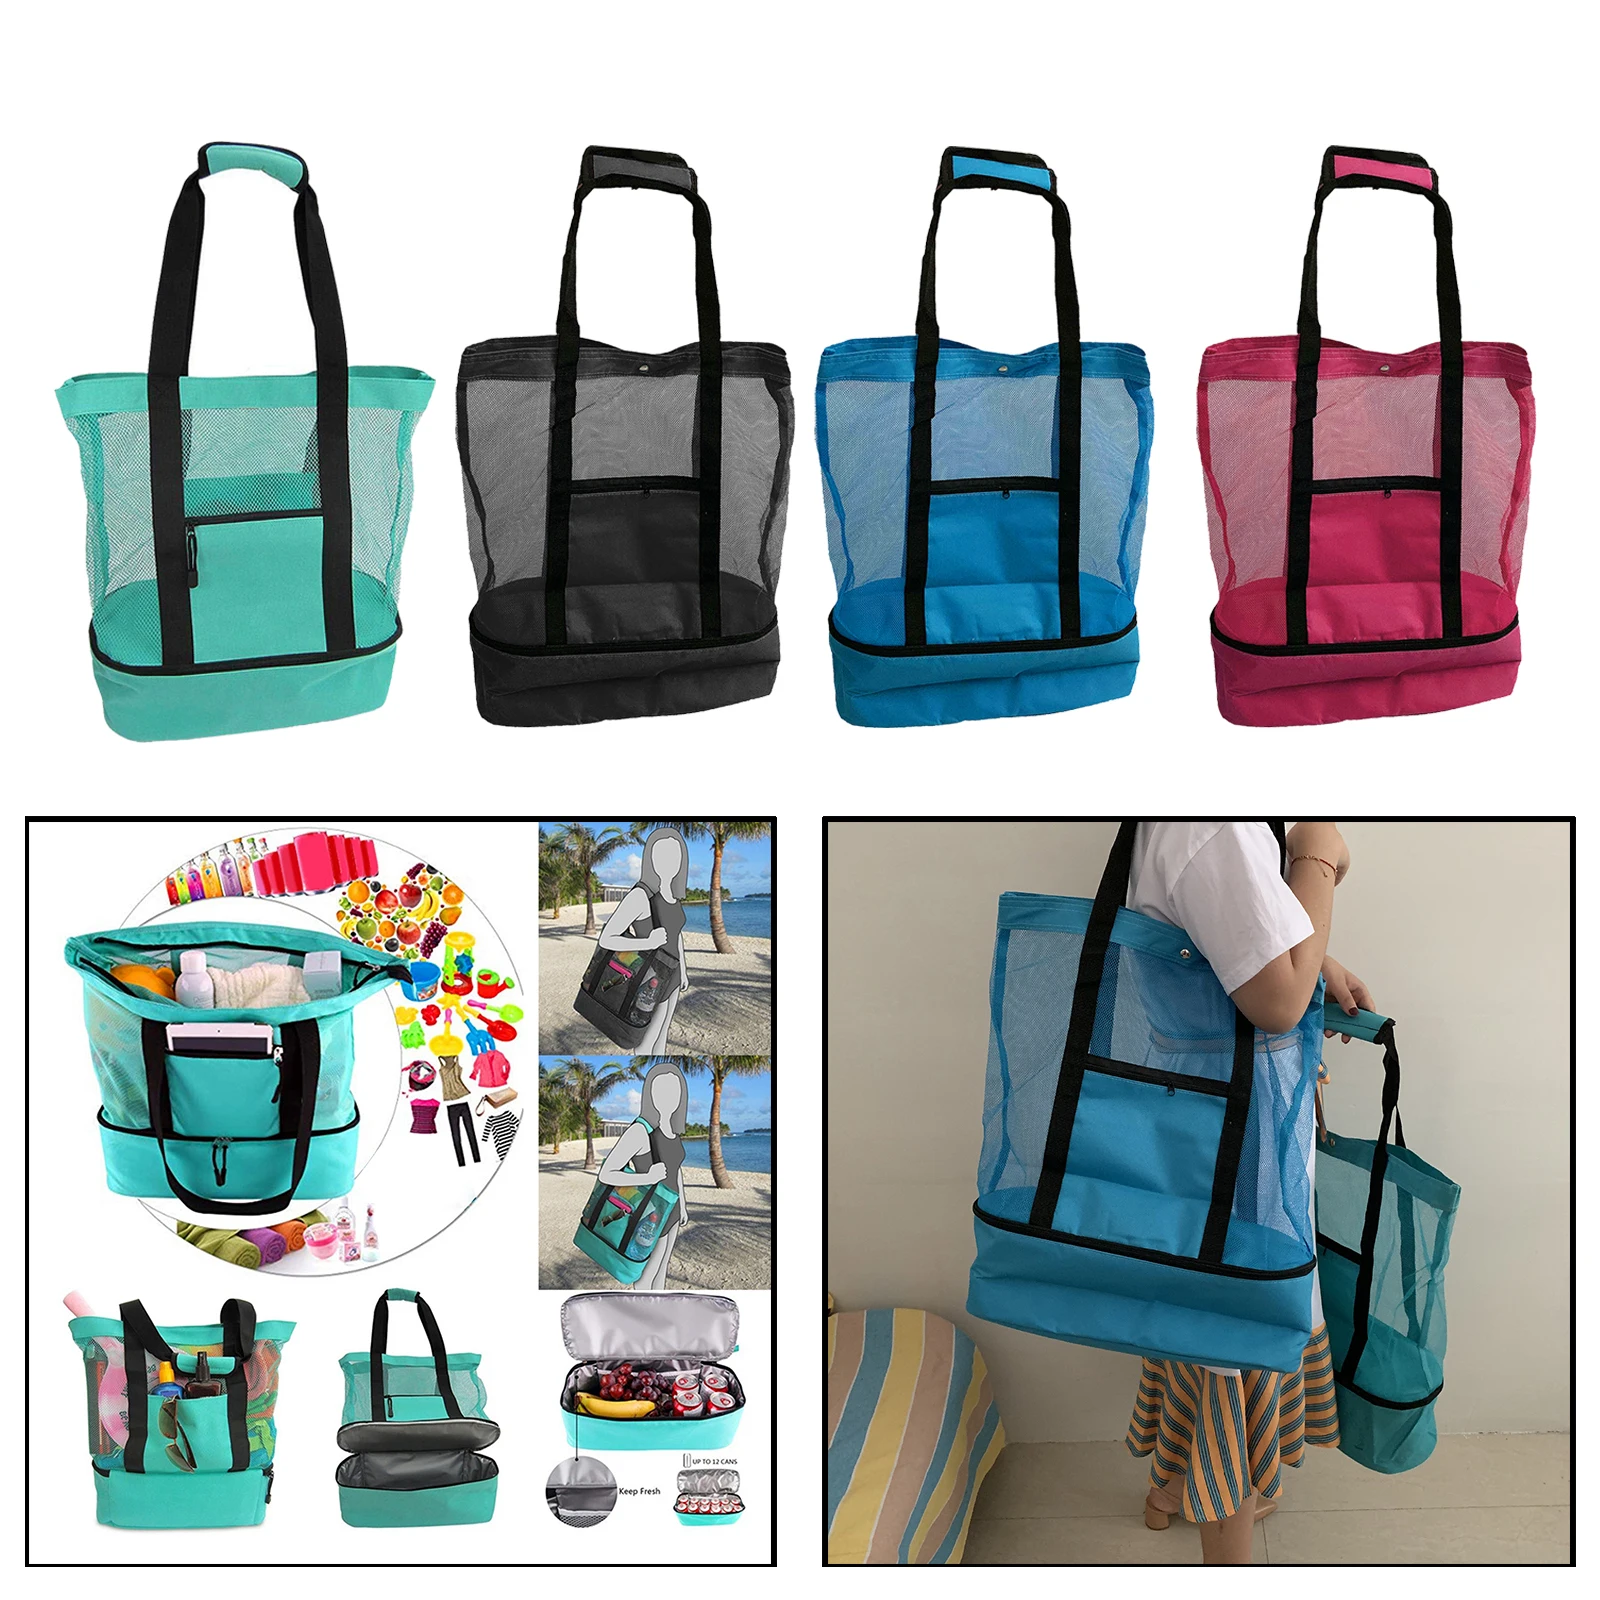 Mesh Beach Bag Oversized Lightweight Tote Bag for Women Picnic Bag Travel Bag With Pockets Zippers Insulated Picnic Cooler 